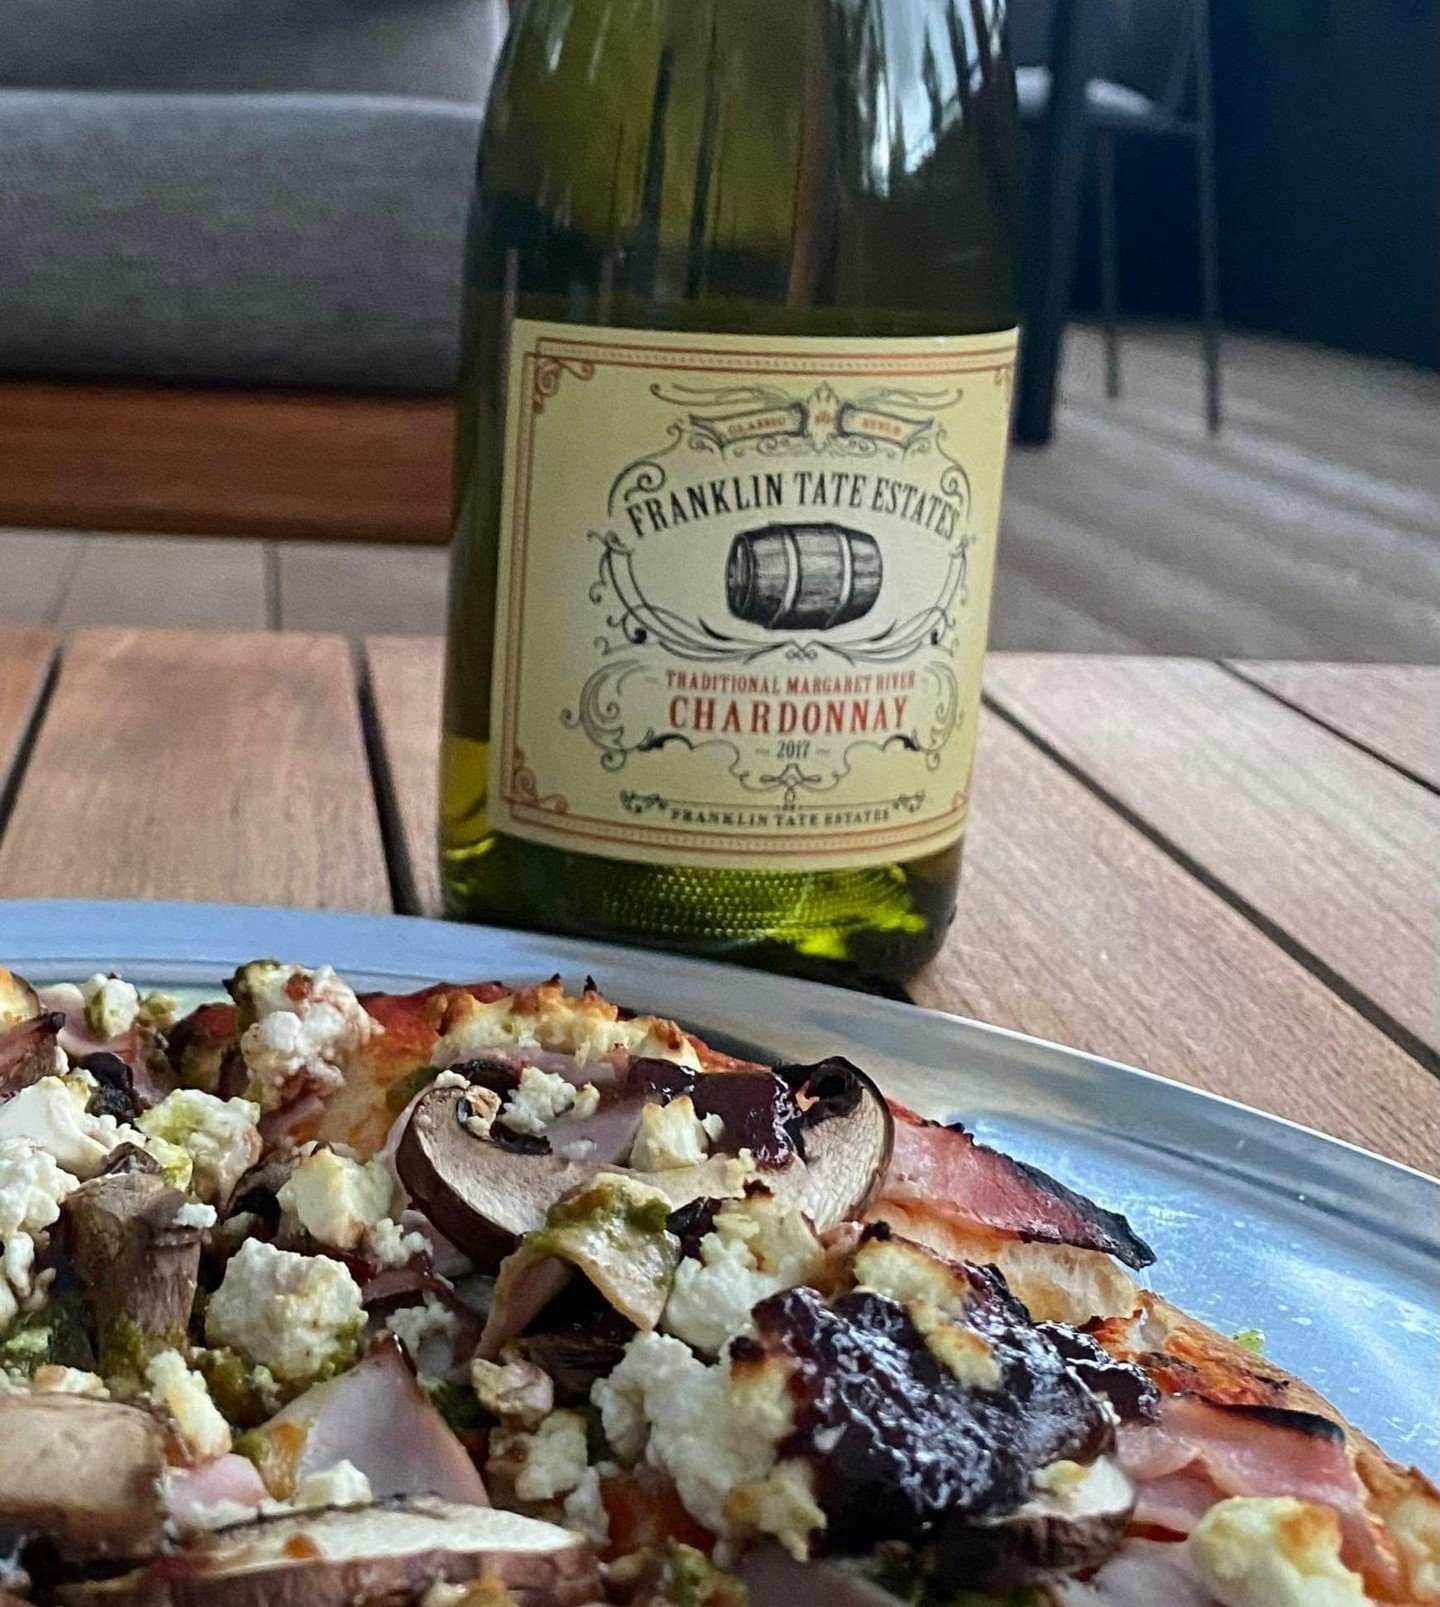 Pizza nights just got better with Franklin Tate Estate Chardonnay!